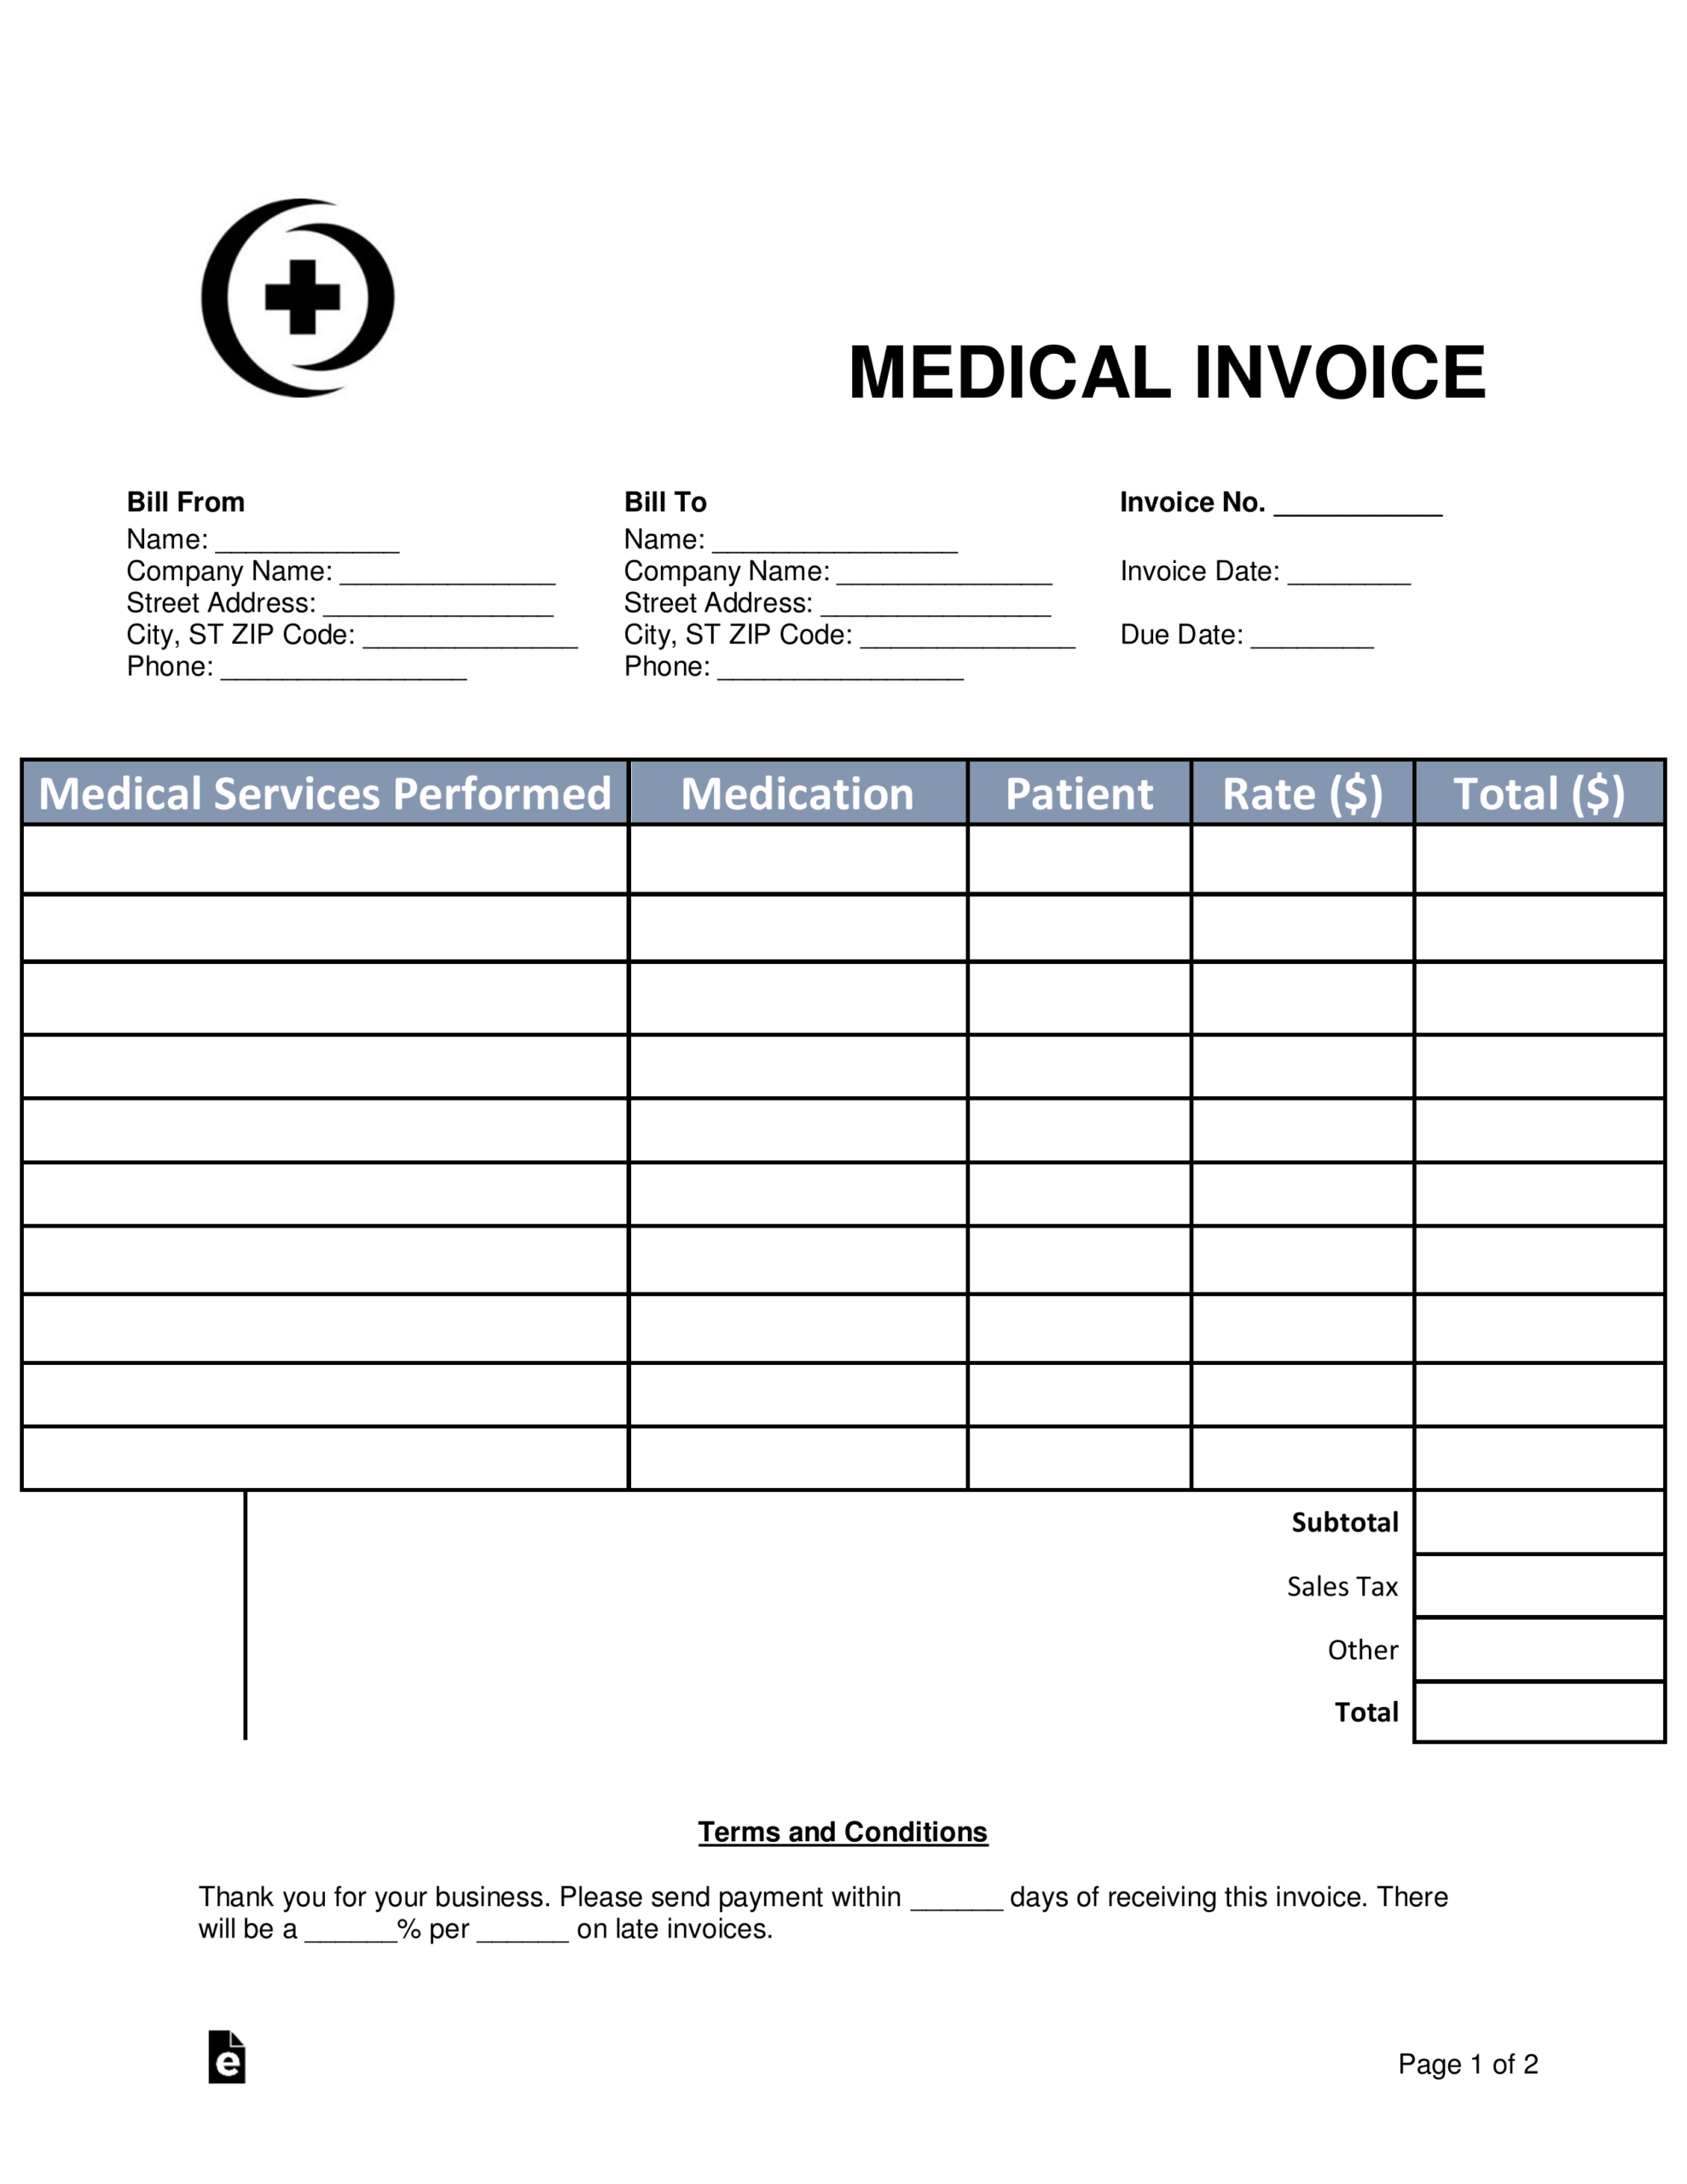 Free Medical Invoice Template – Word | Pdf | Eforms – Free With Regard To Doctors Invoice Template